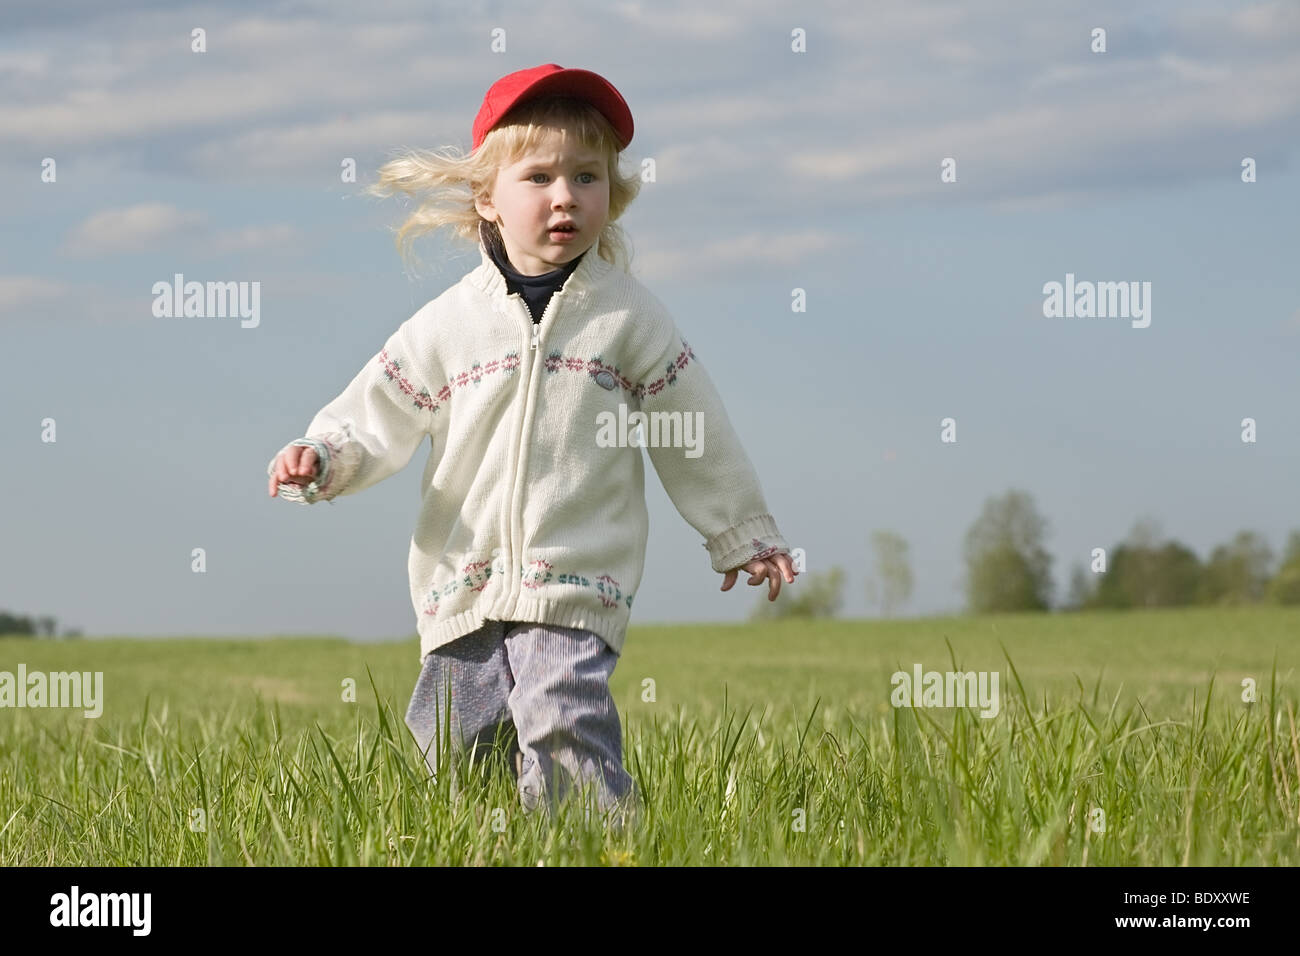 funny little girl running over green grass meadow Stock Photo